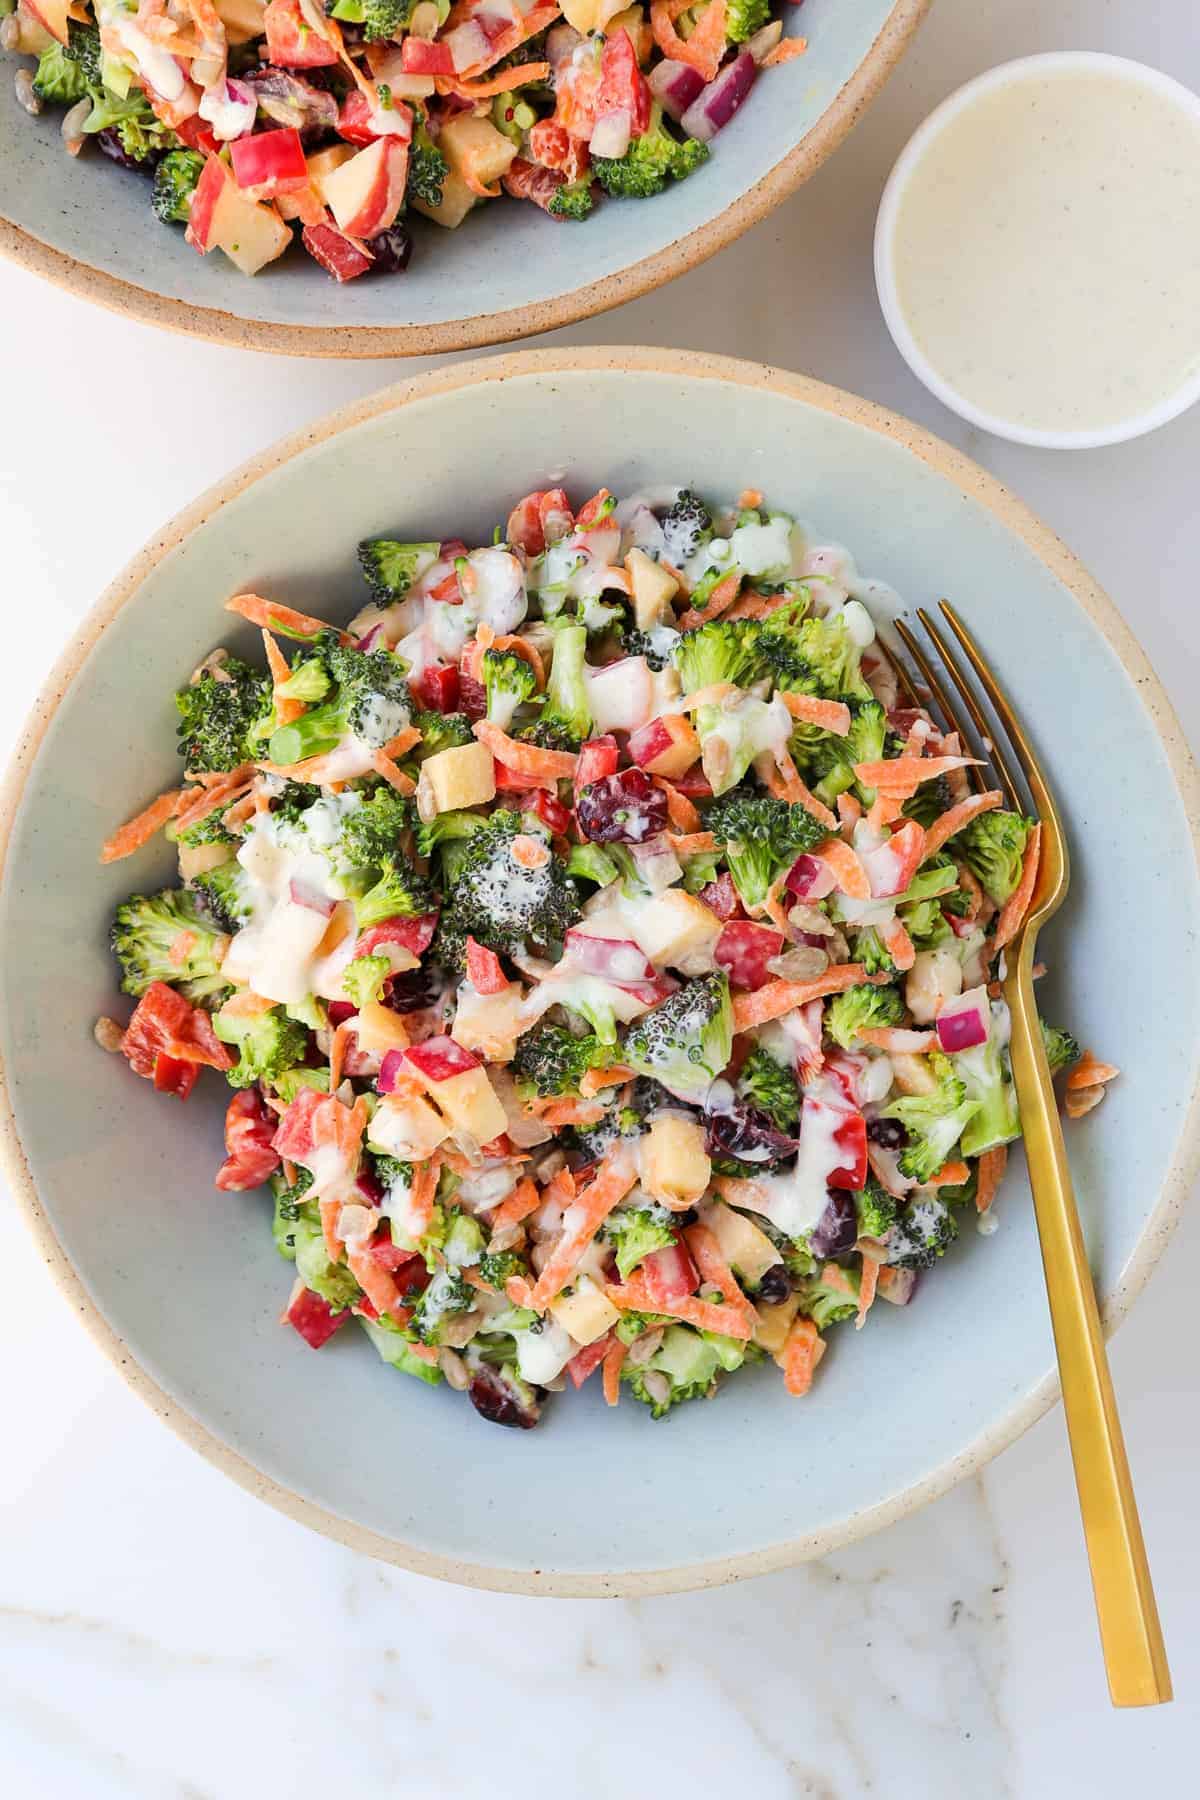 Broccoli salad in a bowl with a fork and extra tahini dressing in a little dish.